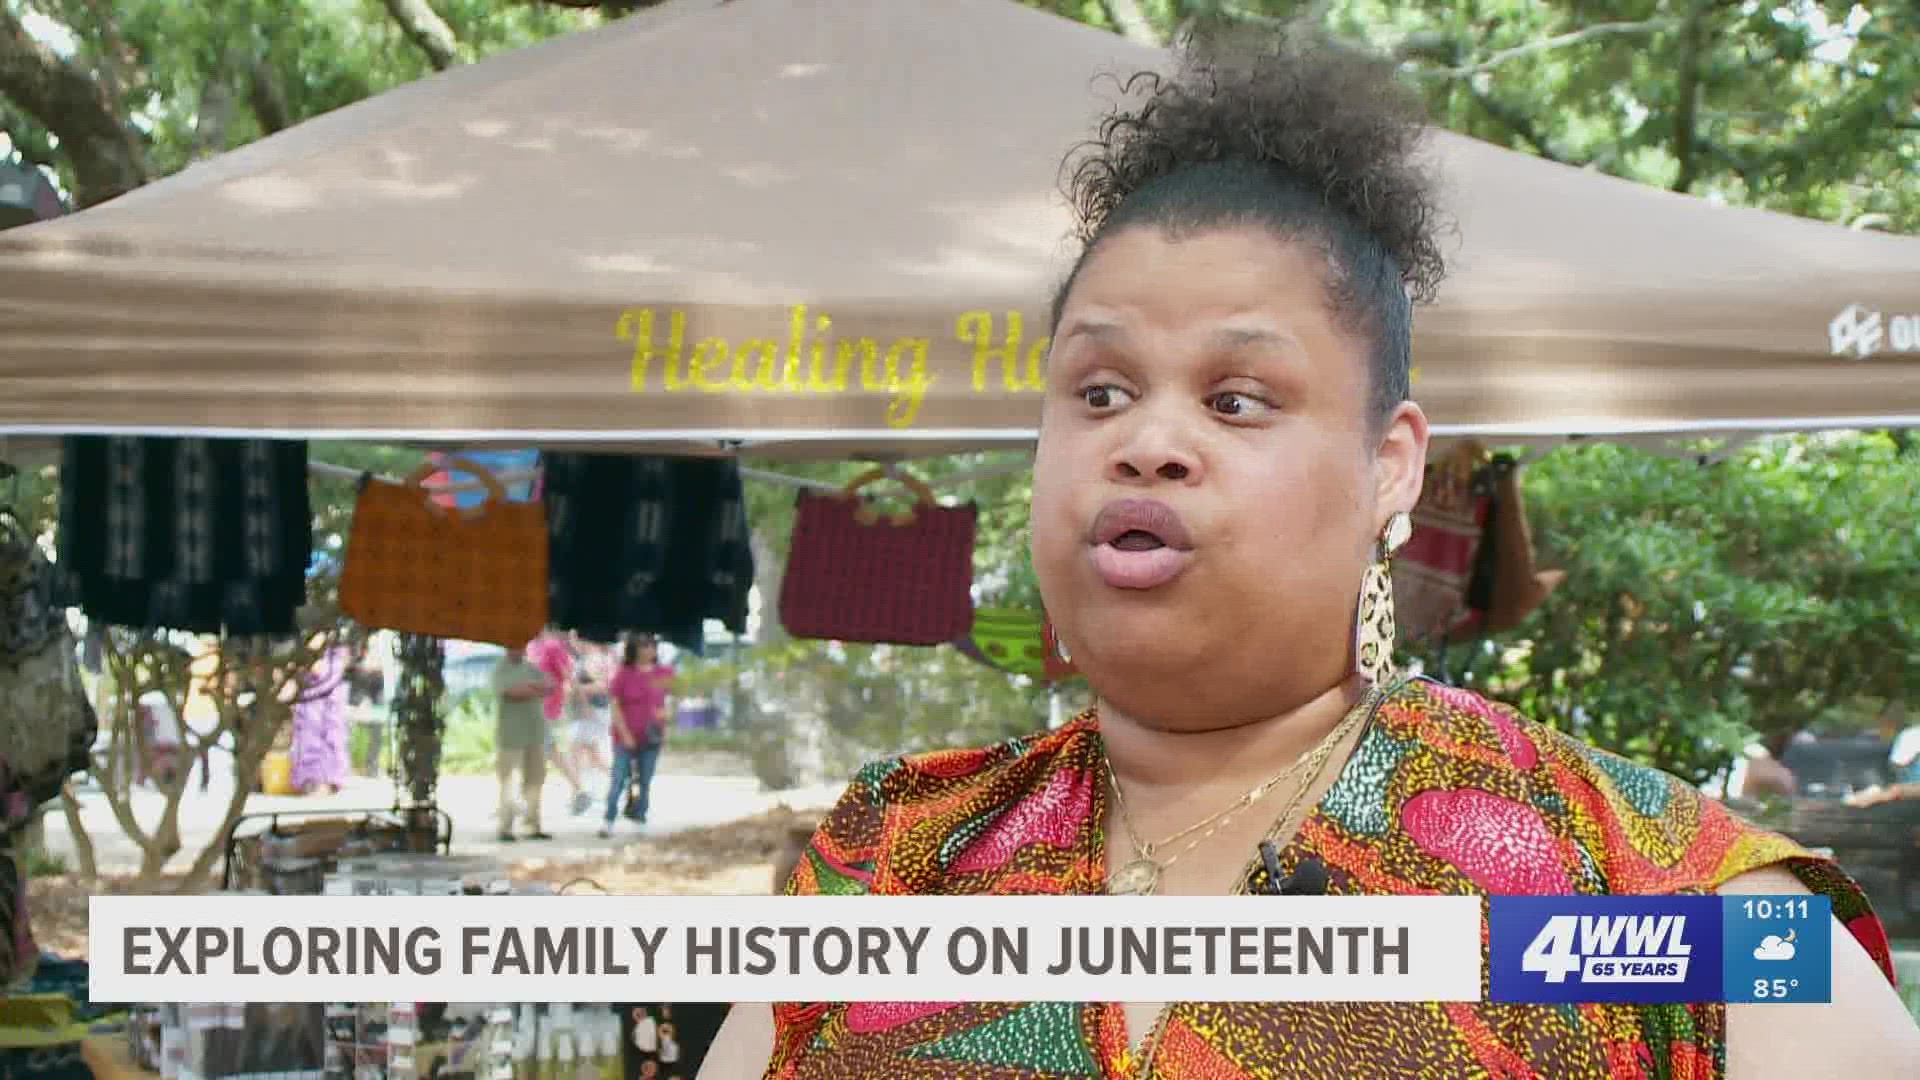 Leodia Day visited Whitney Plantation two days before Juneteenth. She shared her family's story with Eyewitness News.